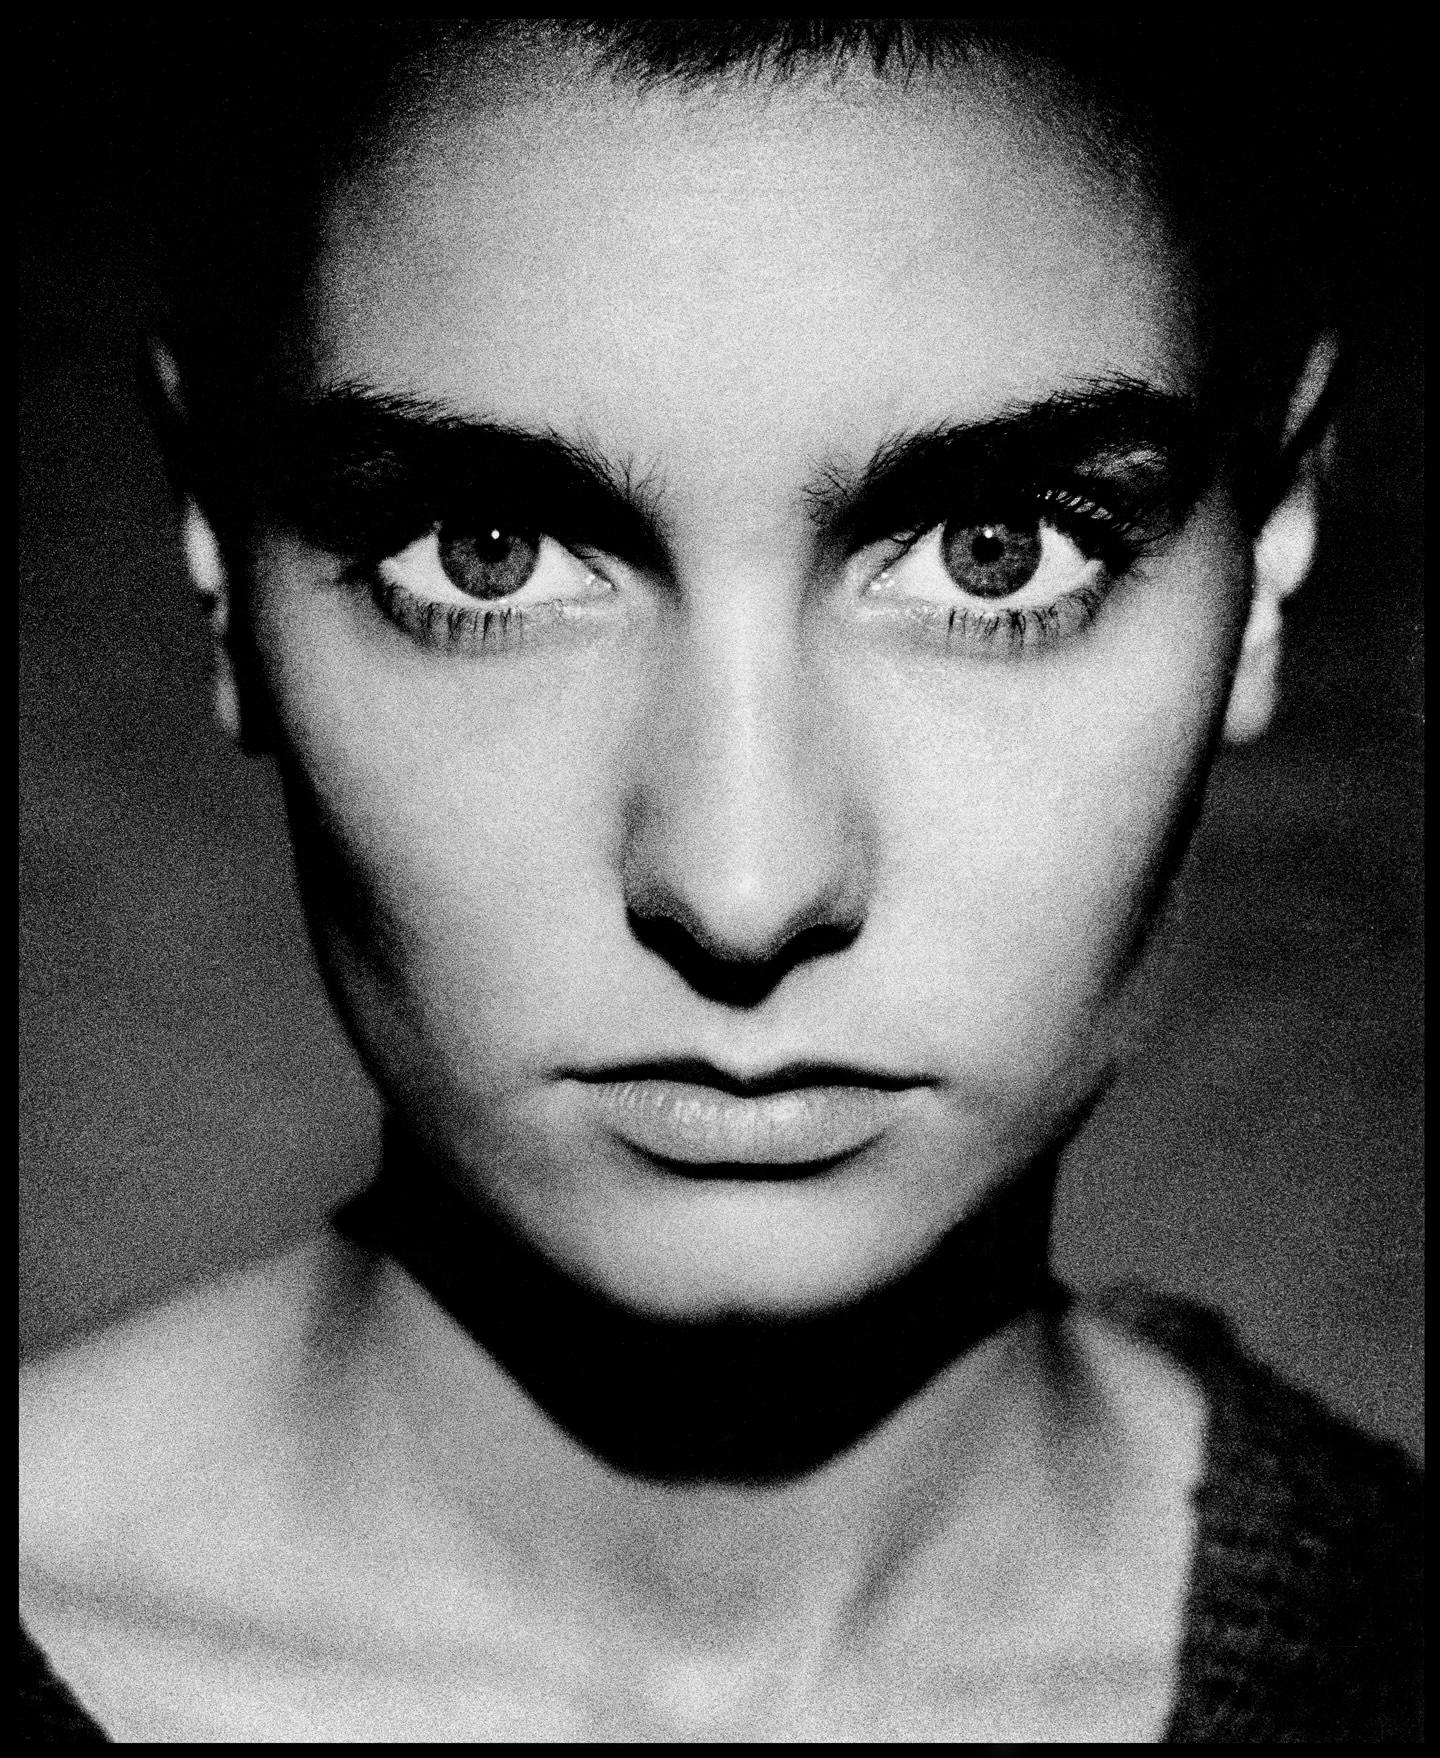 Sinead O'Connor 

1990 

by Kevin Westenberg

Kevin Westenberg is famed for his creation of provocative and electrifying images of world-class musicians, artists and movie stars for over 25 years. 

His technique of lighting, colour and composition